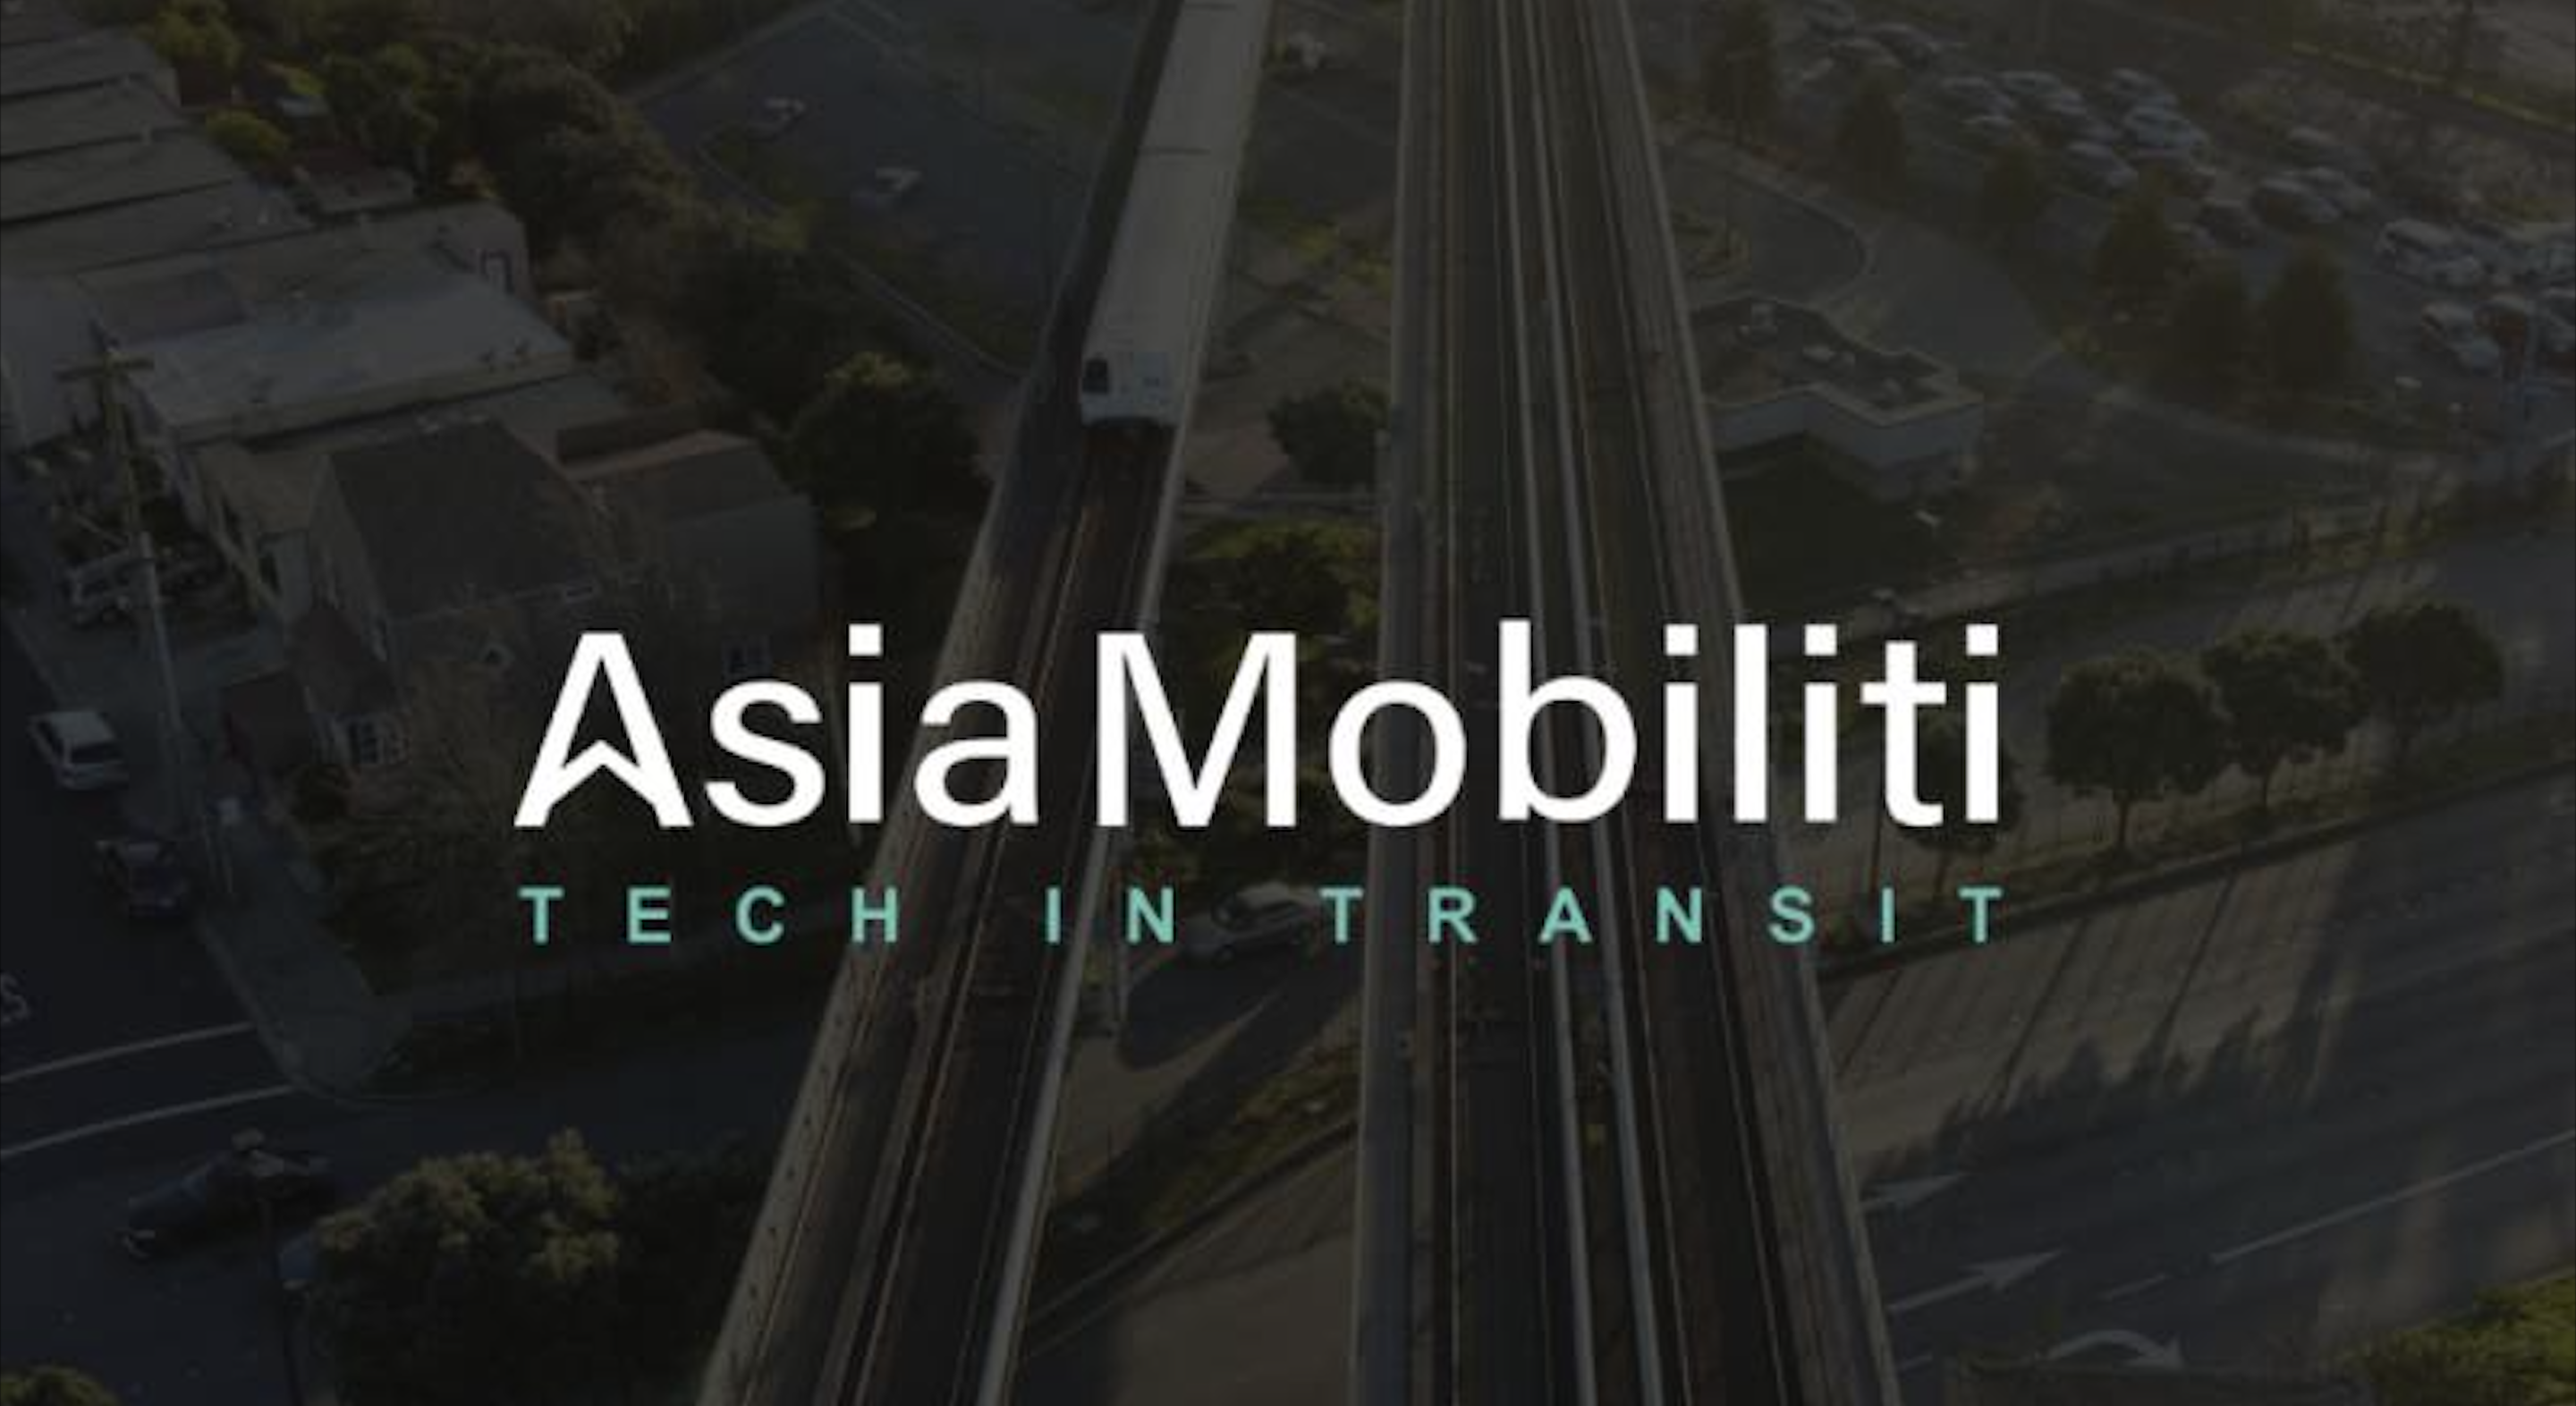 Open tenders could have led to monopoly, says Asia Mobiliti on Selangor DRT project